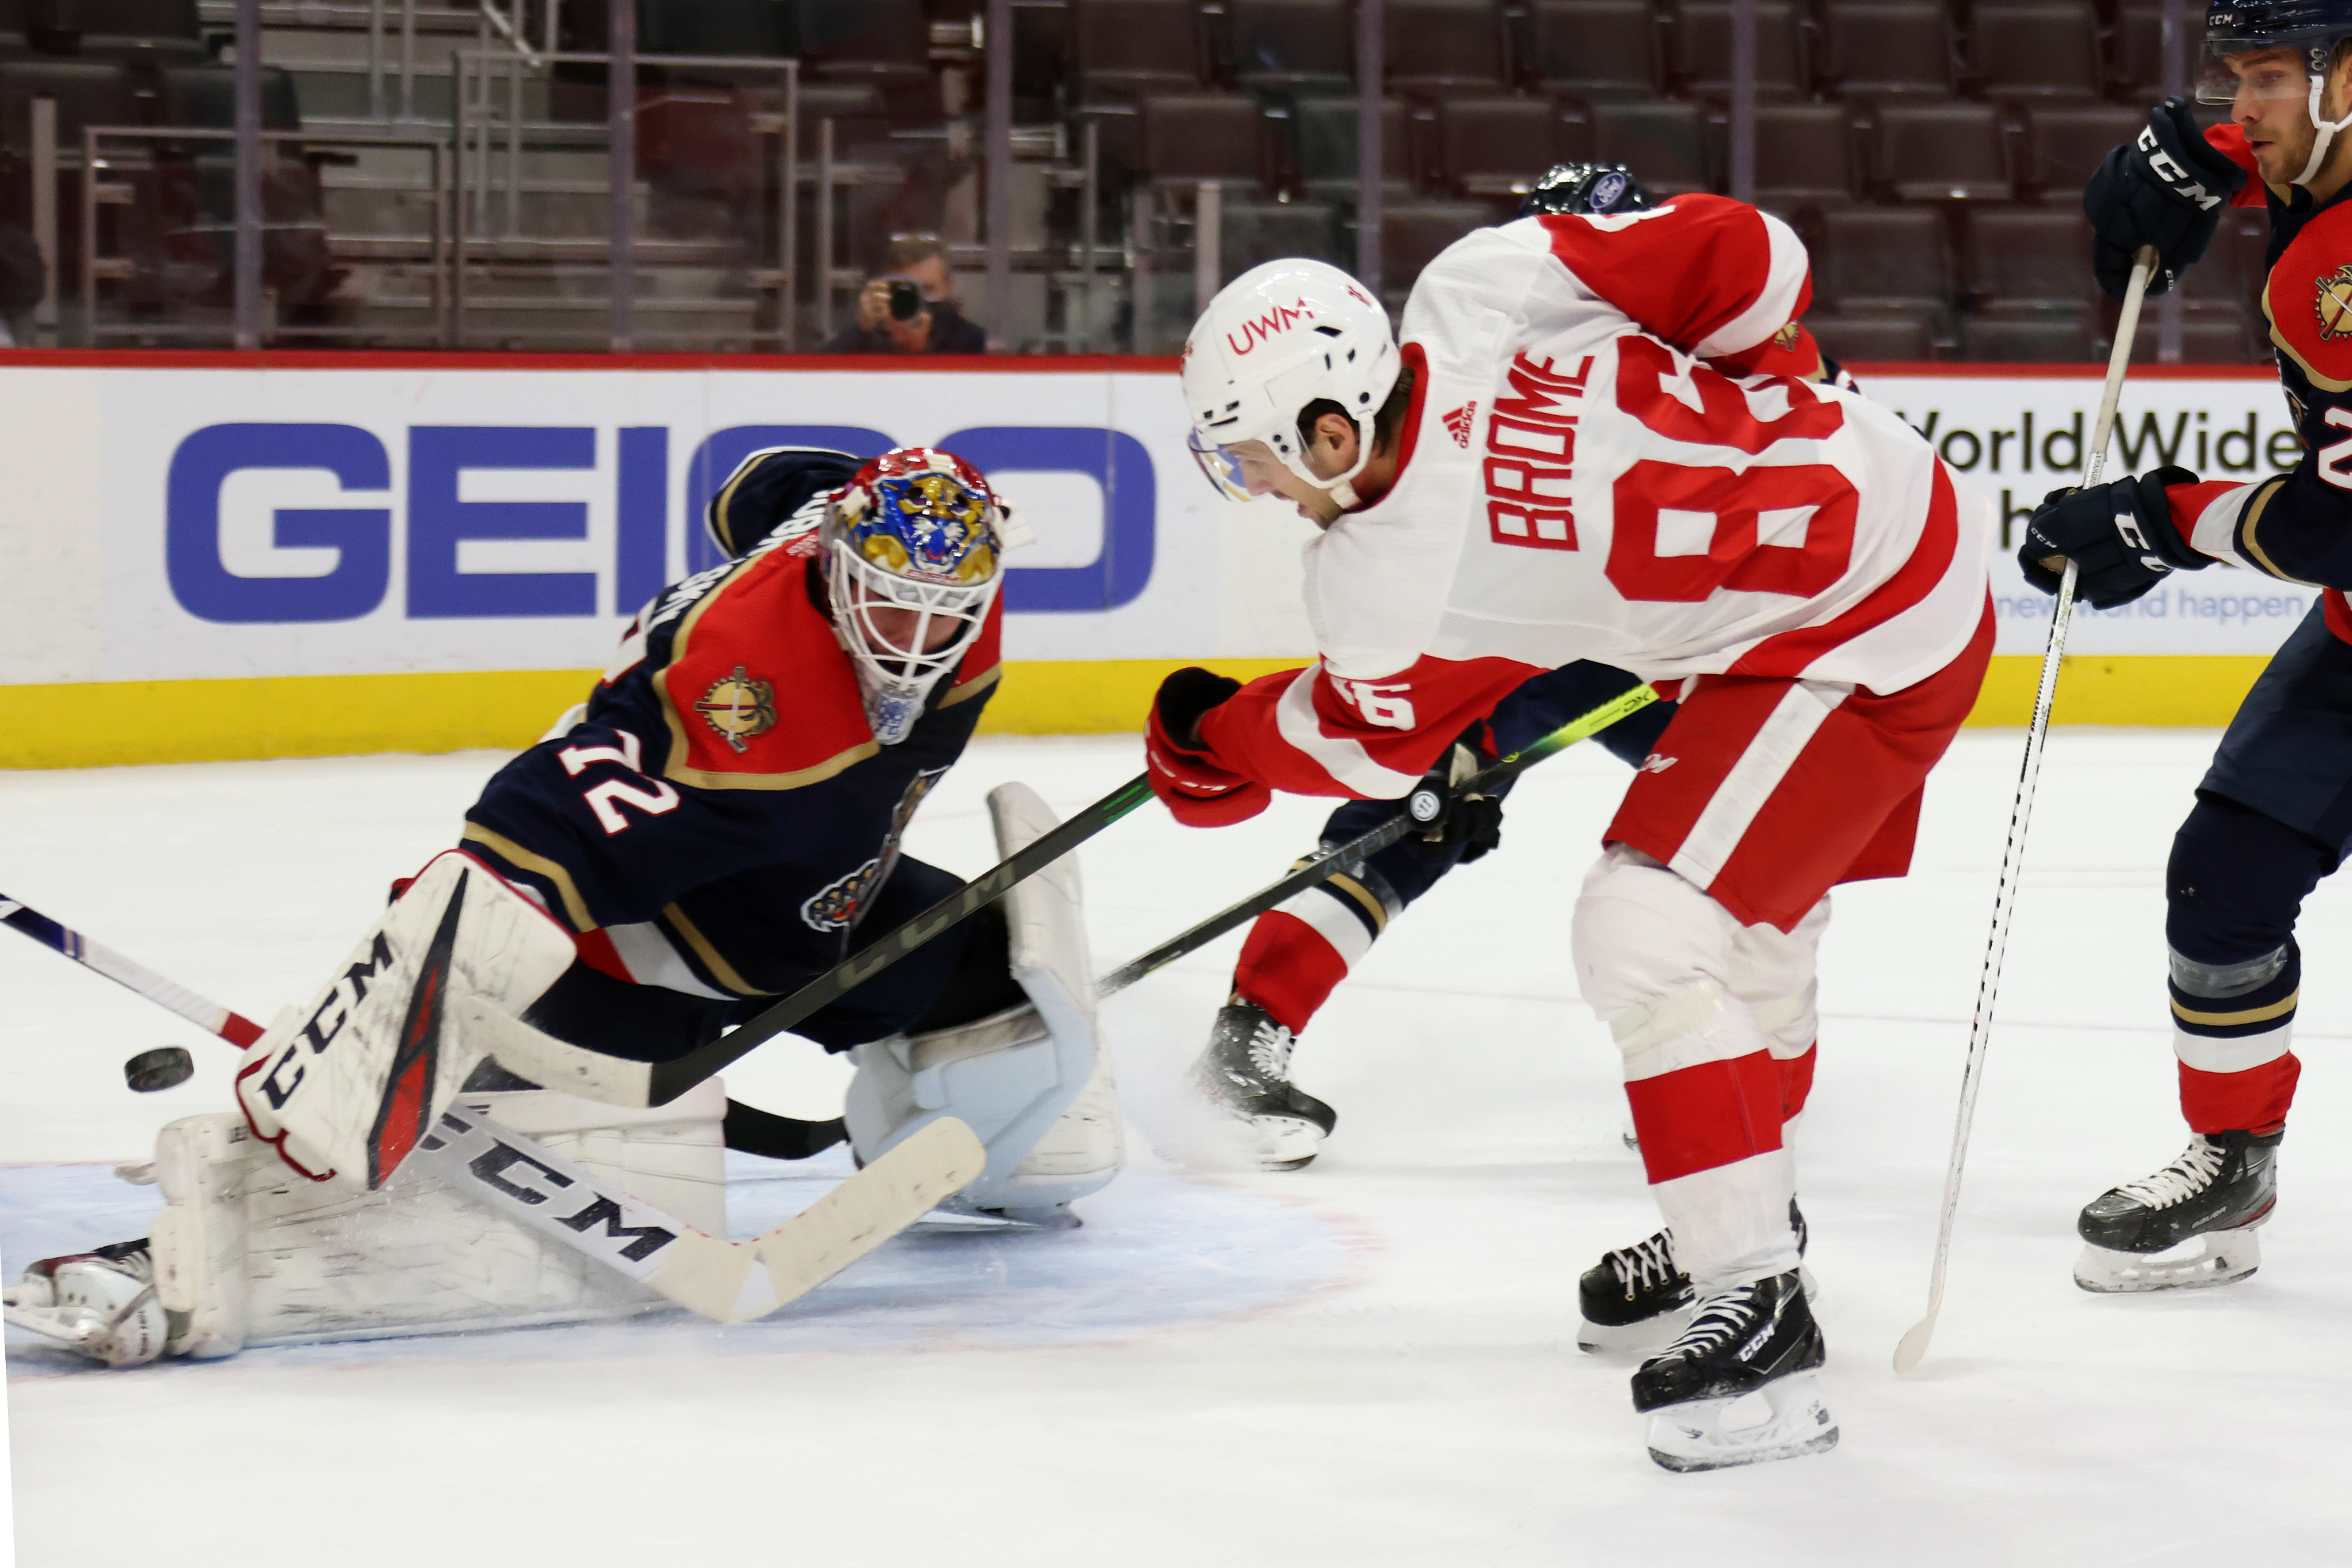 Analysis: What are the Final Grades for the Red Wings Players